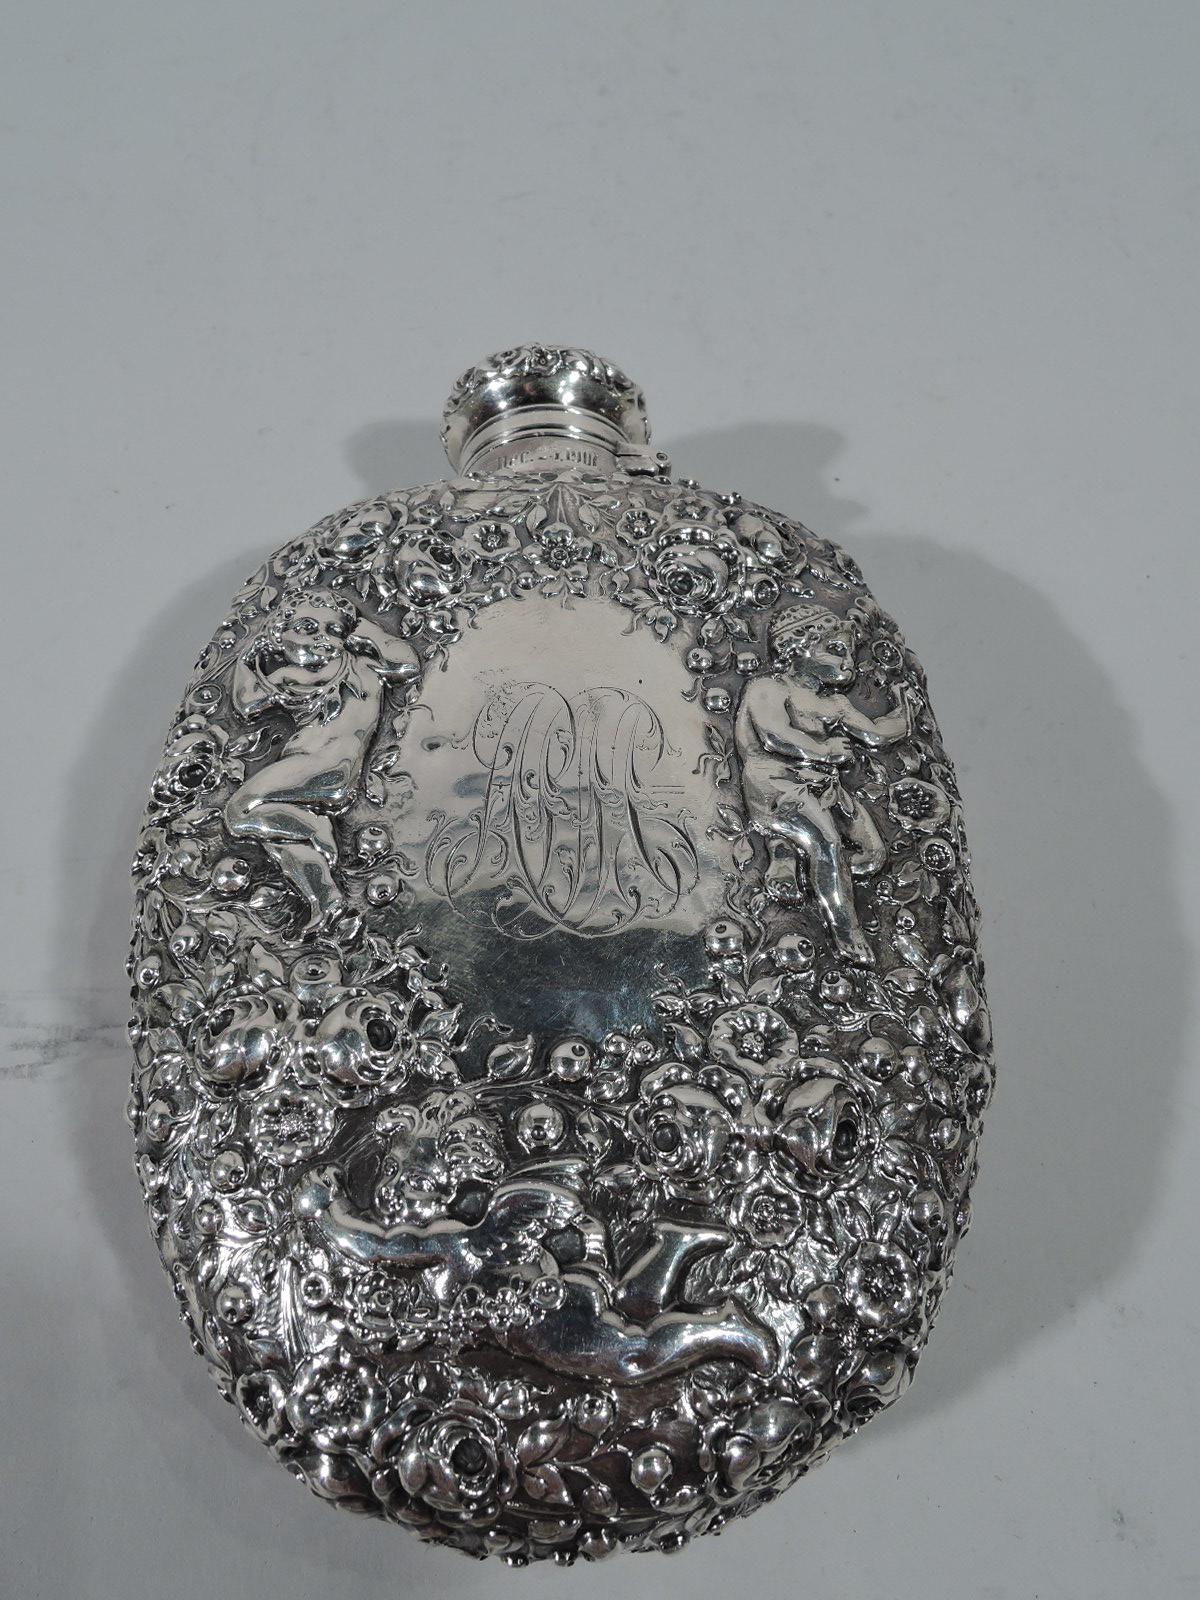 Turn-of-the-century sterling silver flask. Made by Gorham in Providence. Curved body, short neck, and hinged and cork-lined cover. Allover dense repousse cherubs frolicking amidst the roses. On back is oval frame engraved with interlaced dense